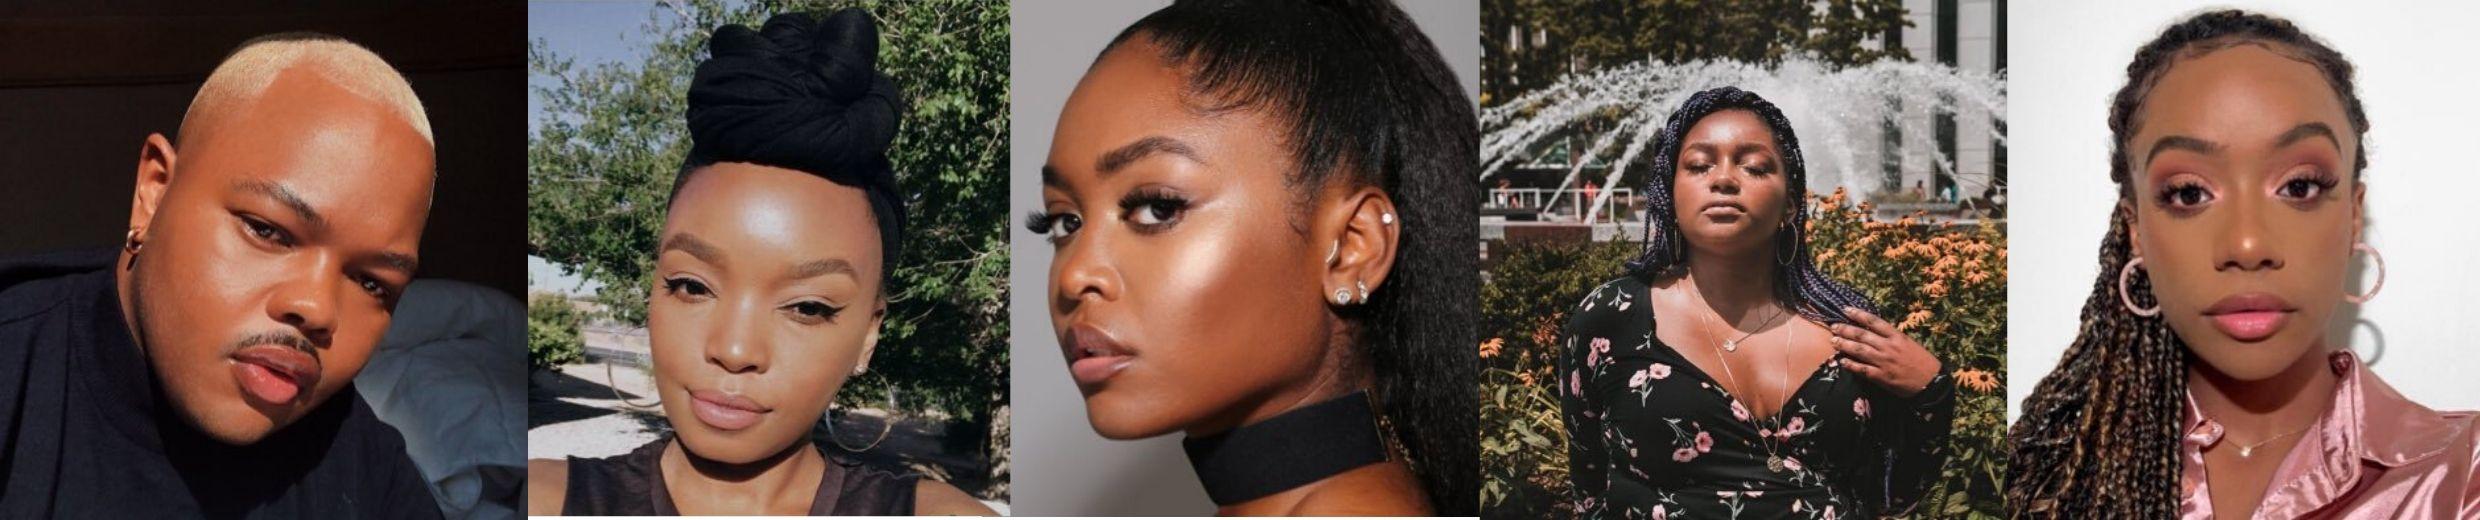 The Best Black Estheticians on Twitter You Need to Follow